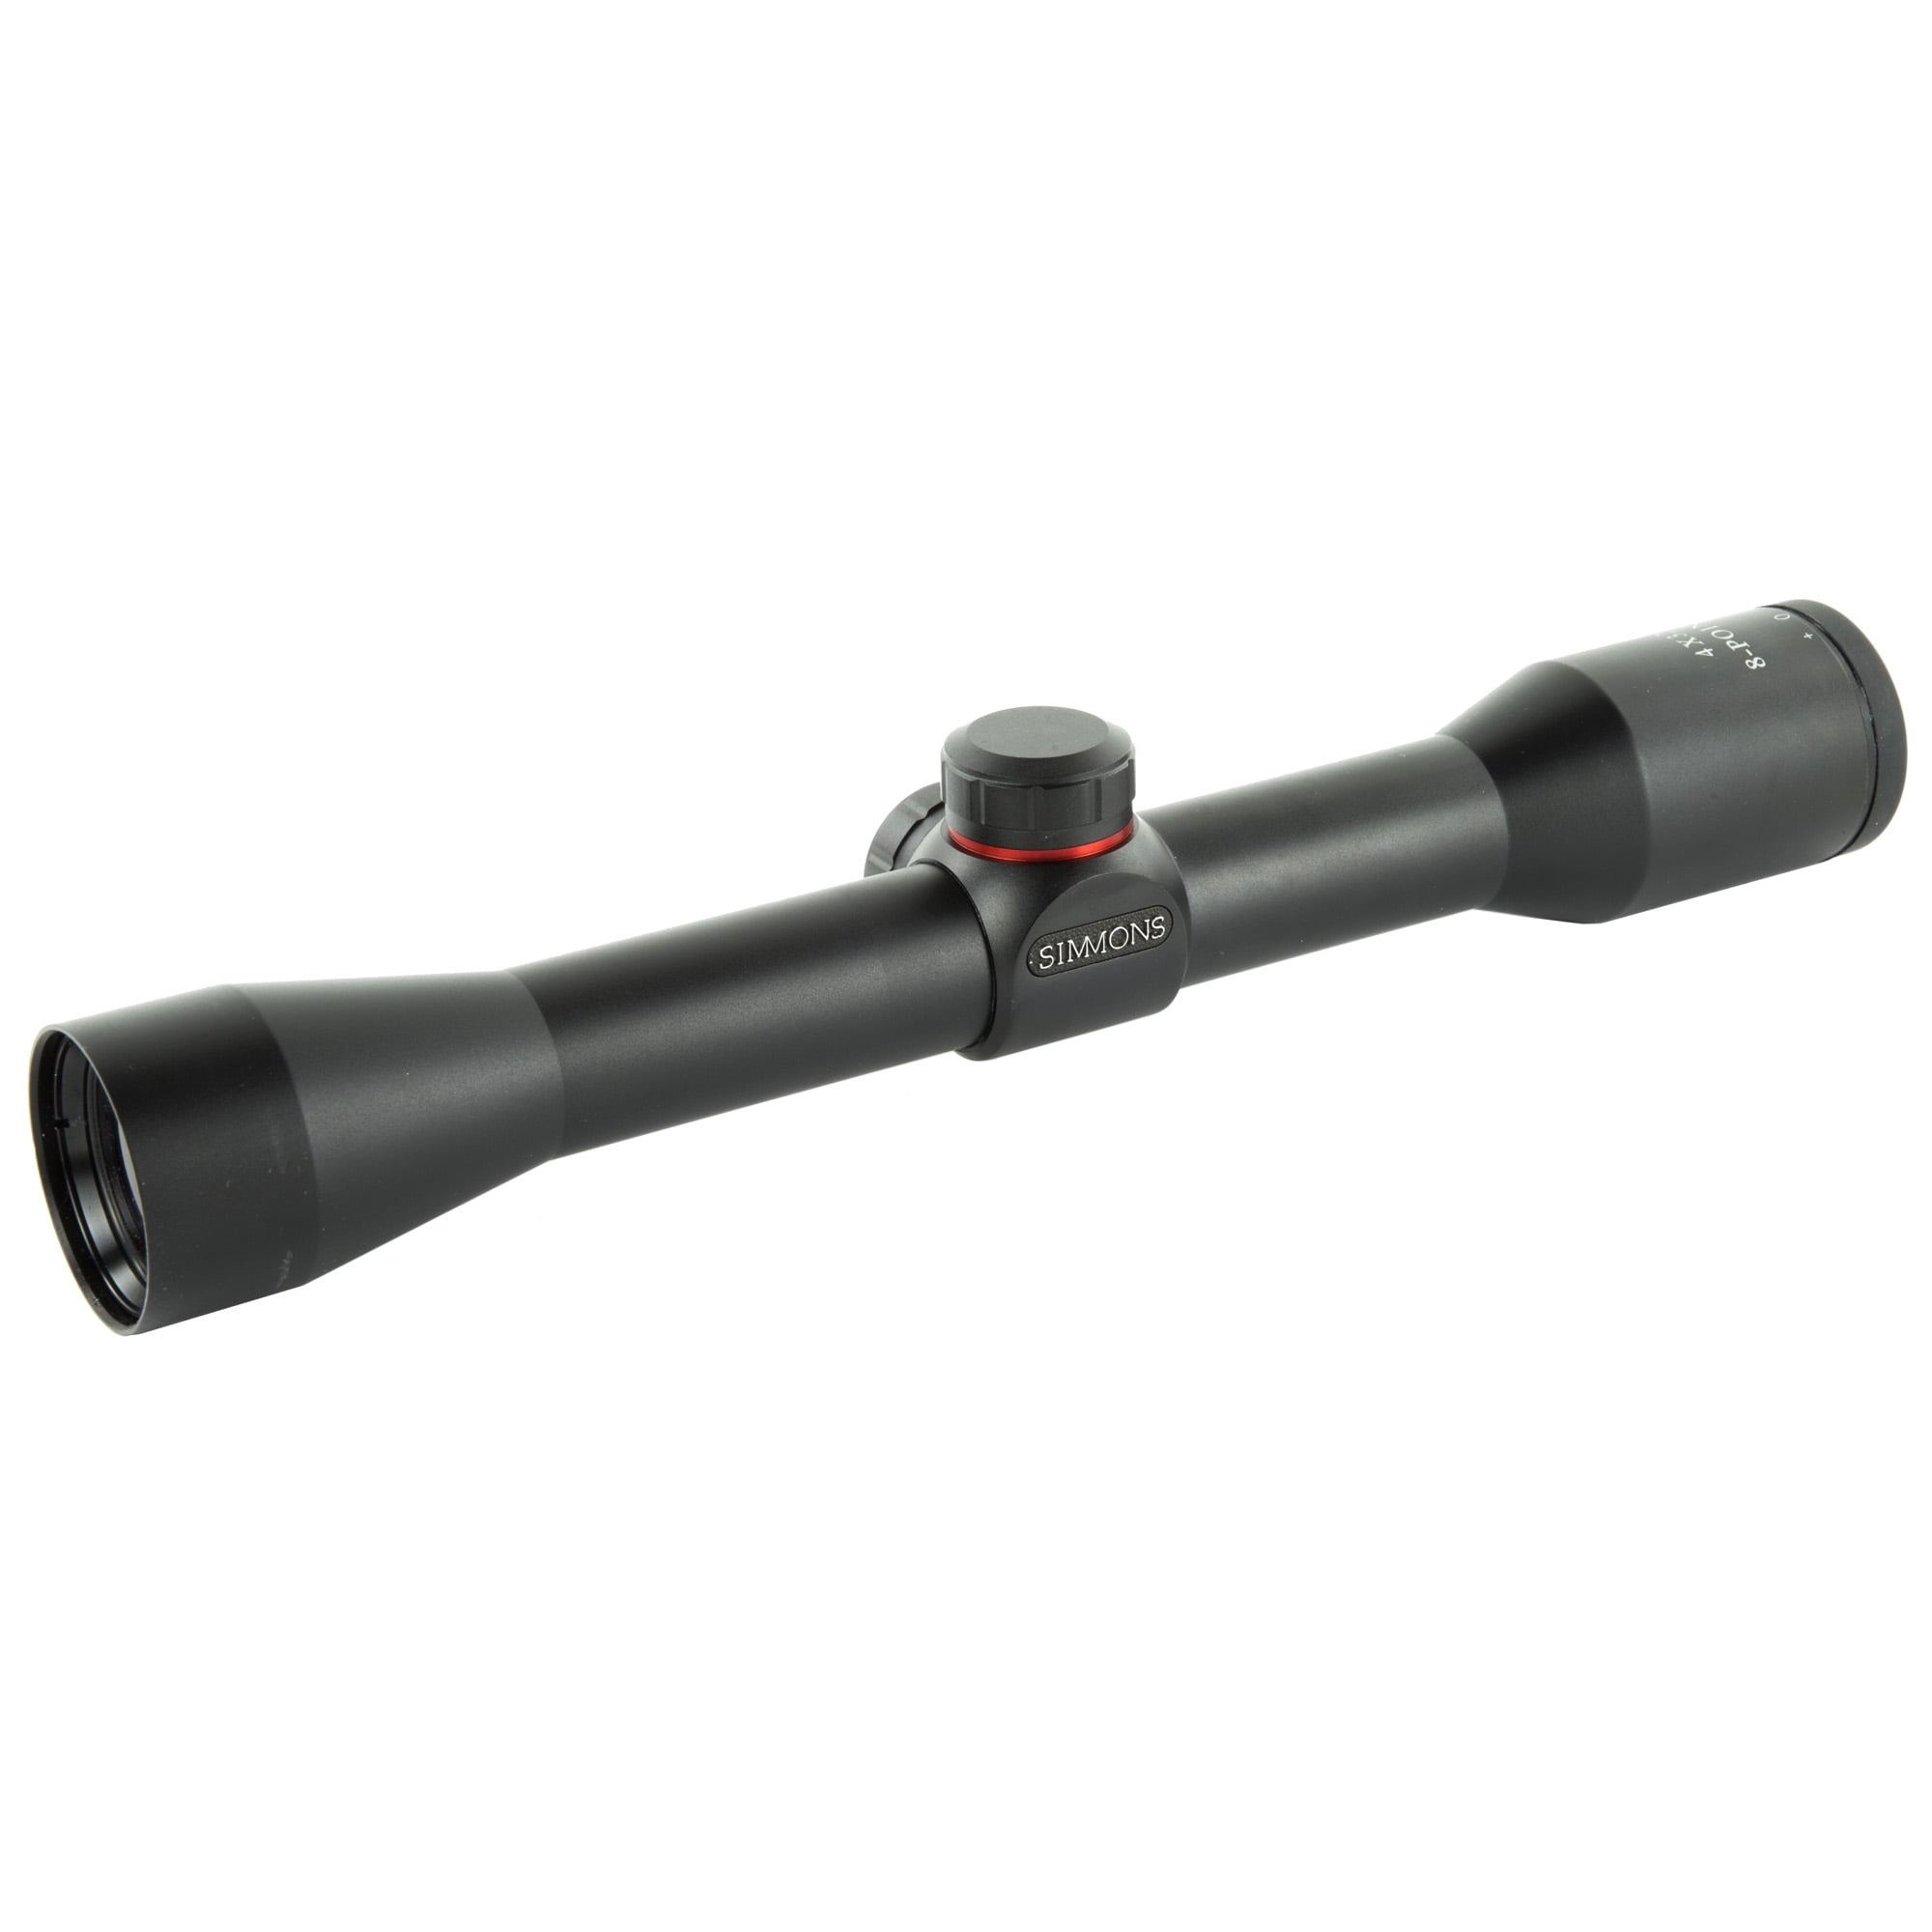 Simmons 510514 8-Point 4x32 Truplex Fully Coated Matte Black Hunting Rifle Scope 